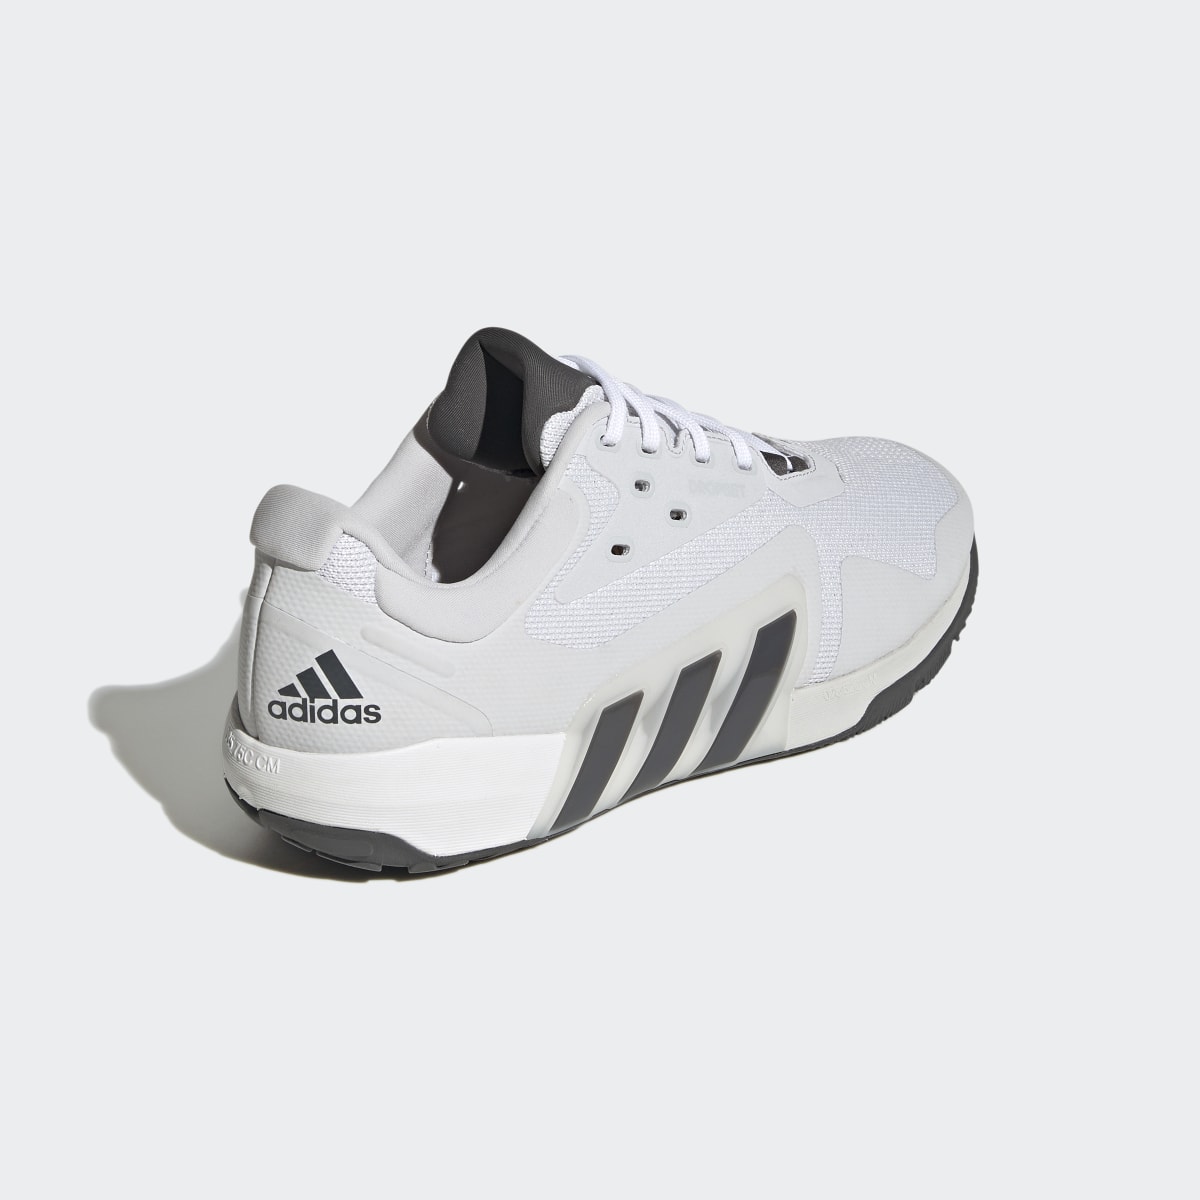 Adidas Dropset Trainer Shoes. 6